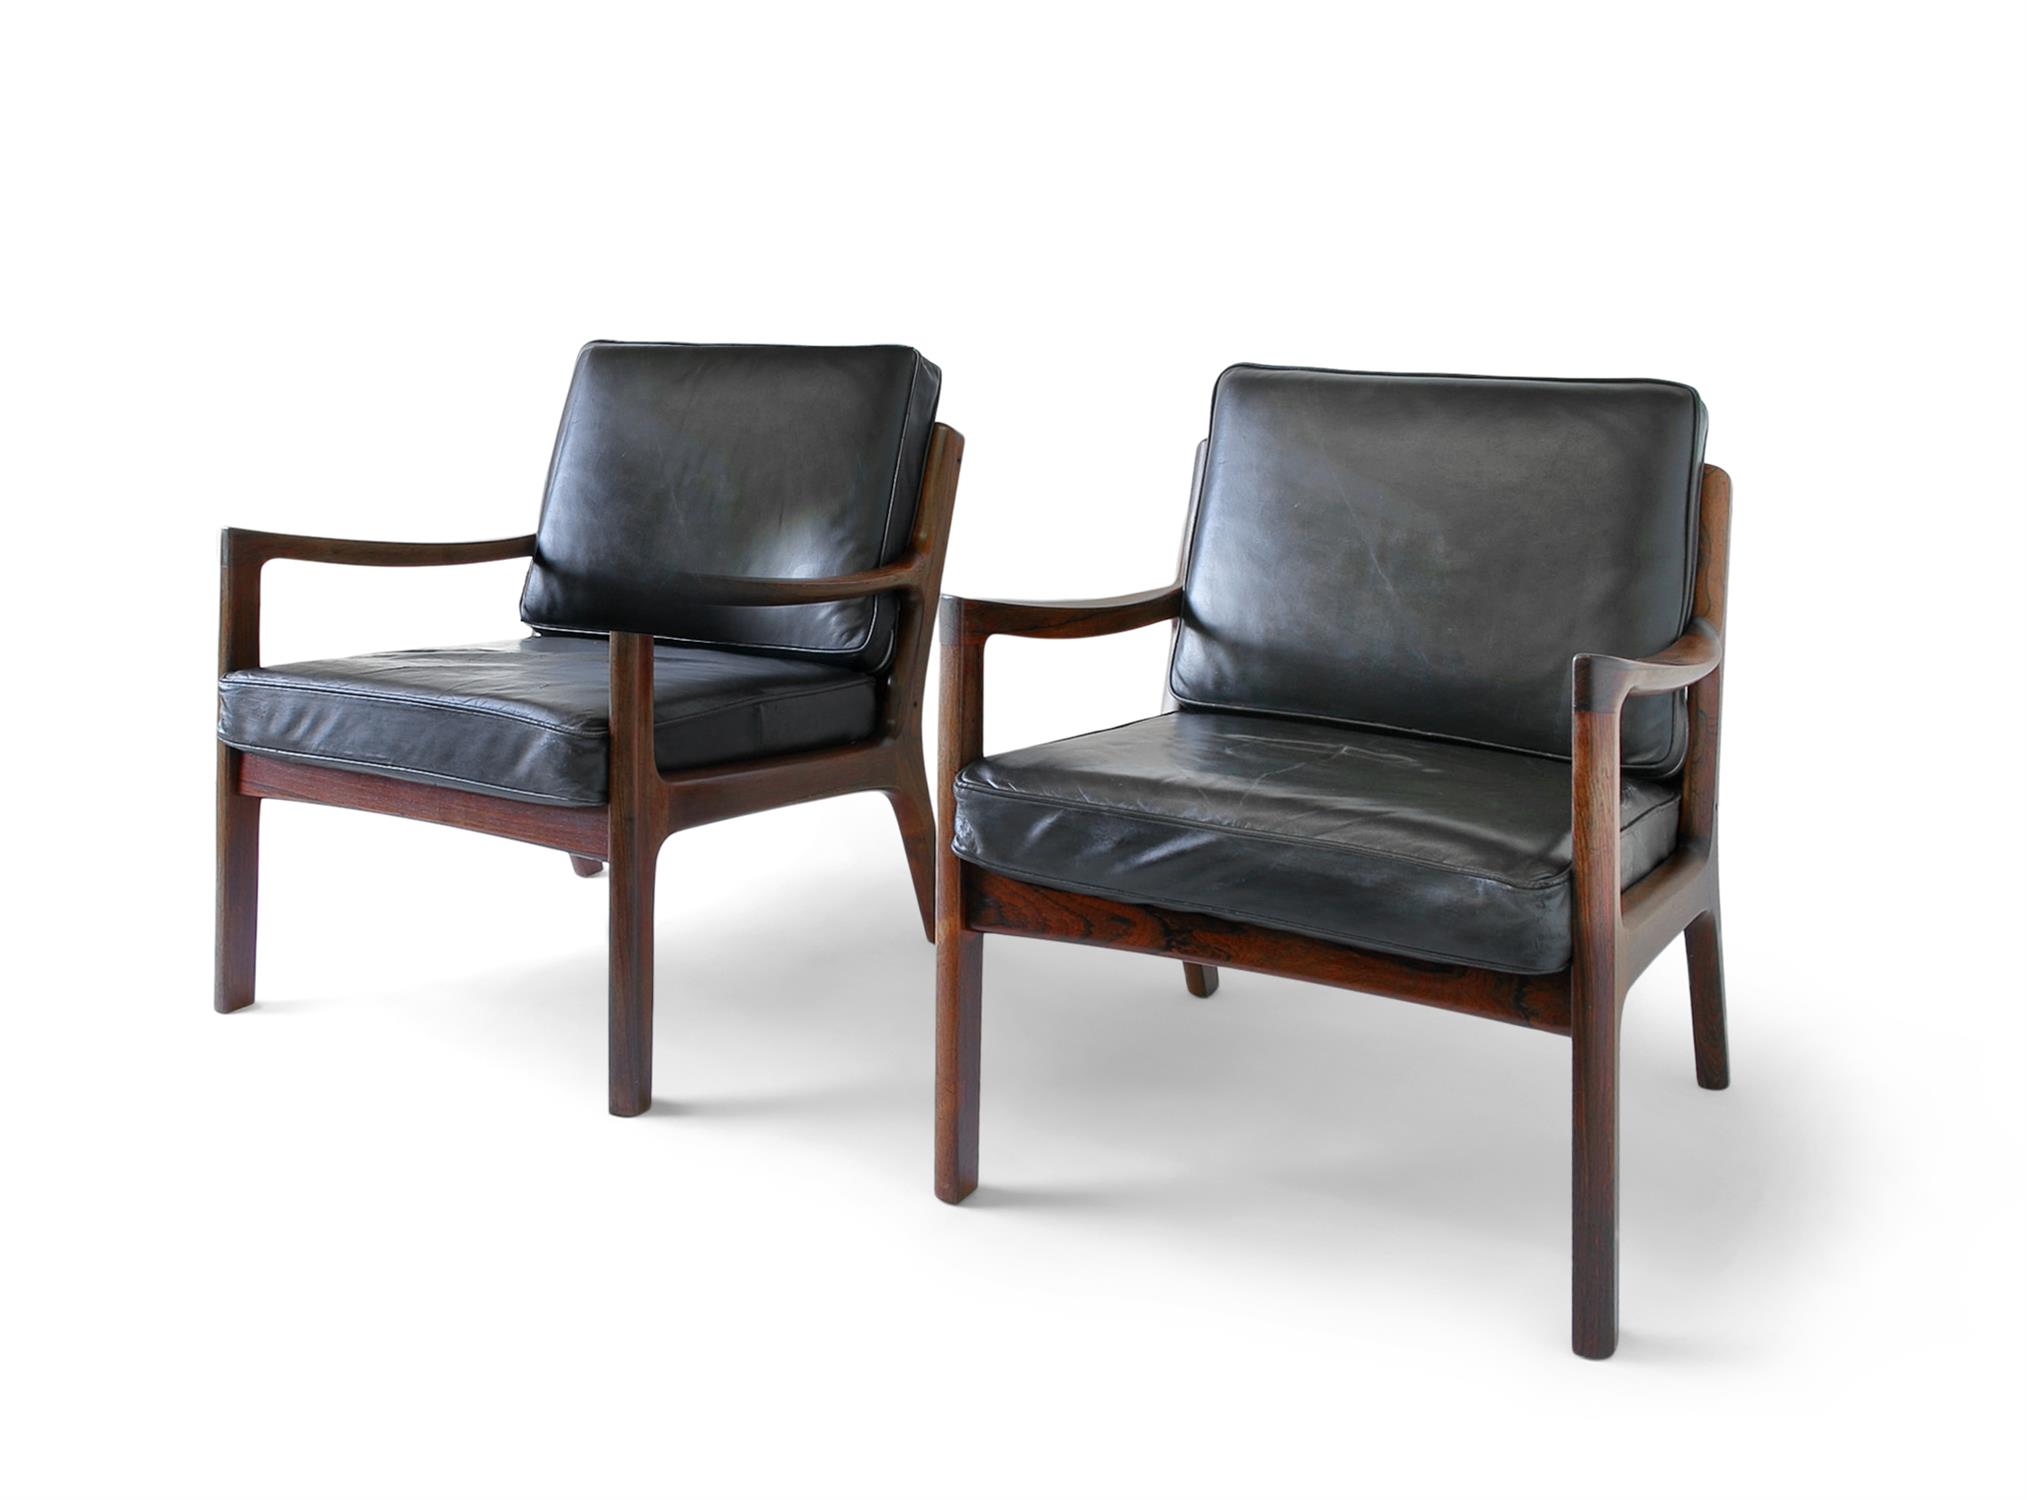 OLE WANSCHER A pair of Senator lounge chairs by Ole Wanscher, produced by France & Sons. Denmark,